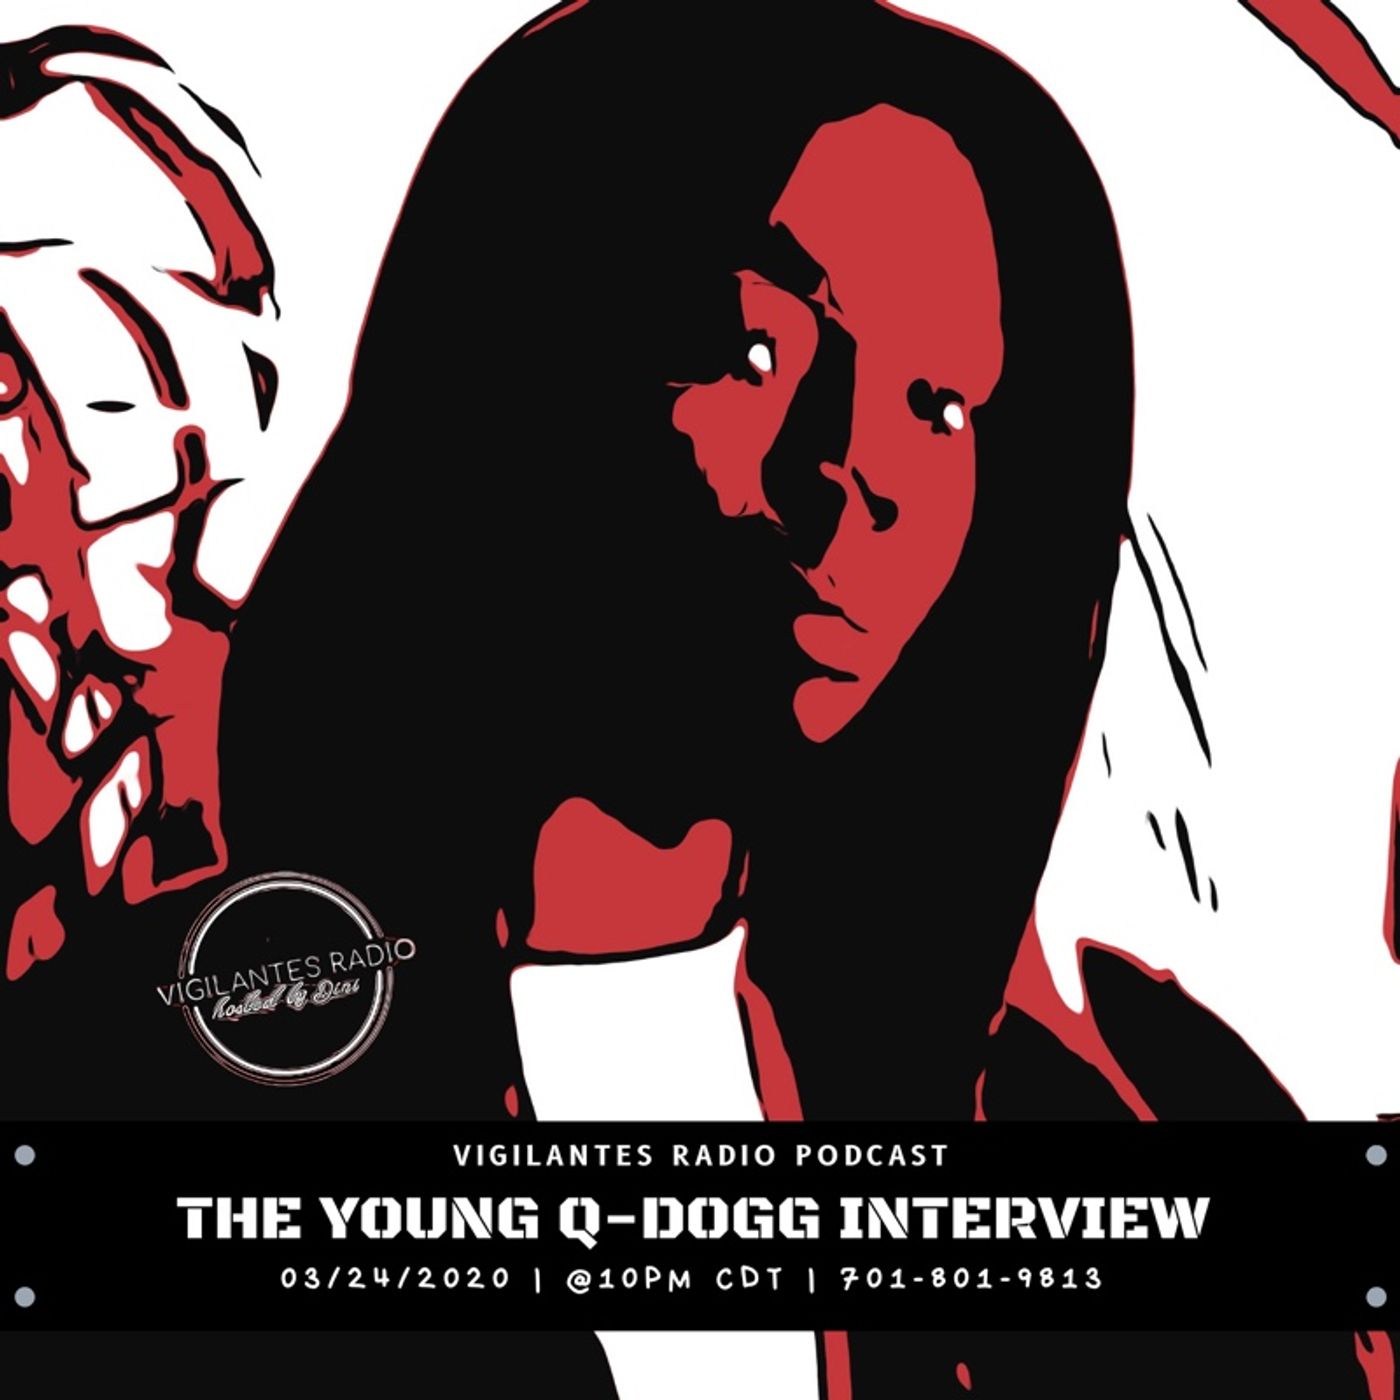 The Young Q-Dogg Interview. Image